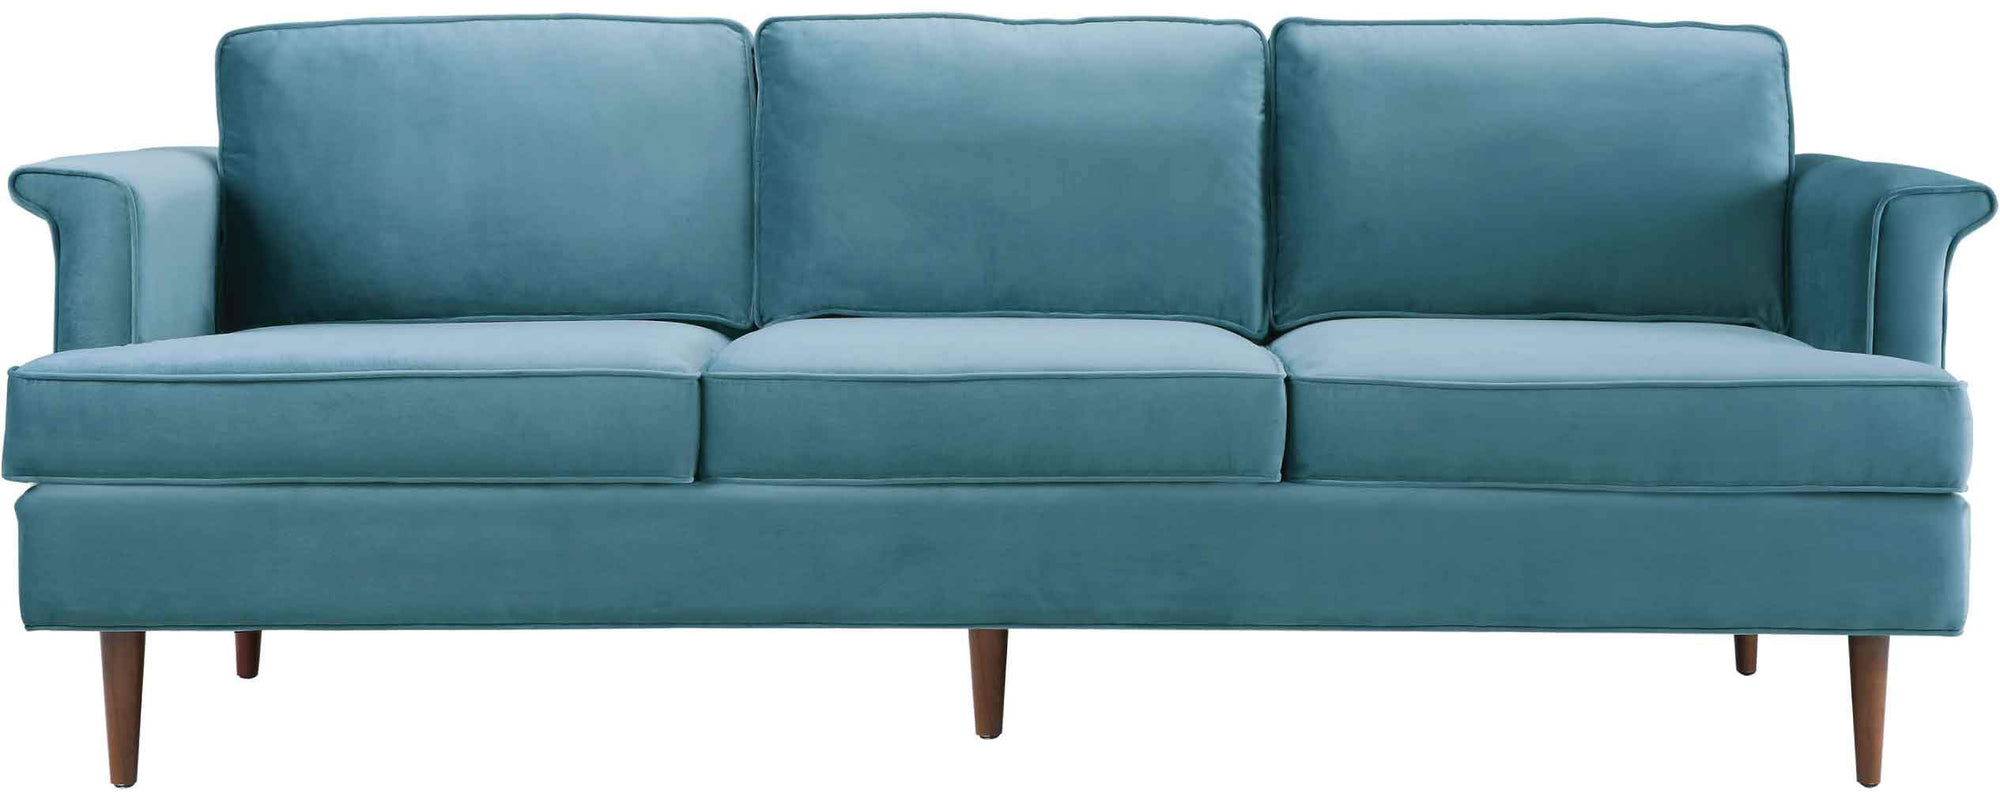 Couches Up to 40% Off